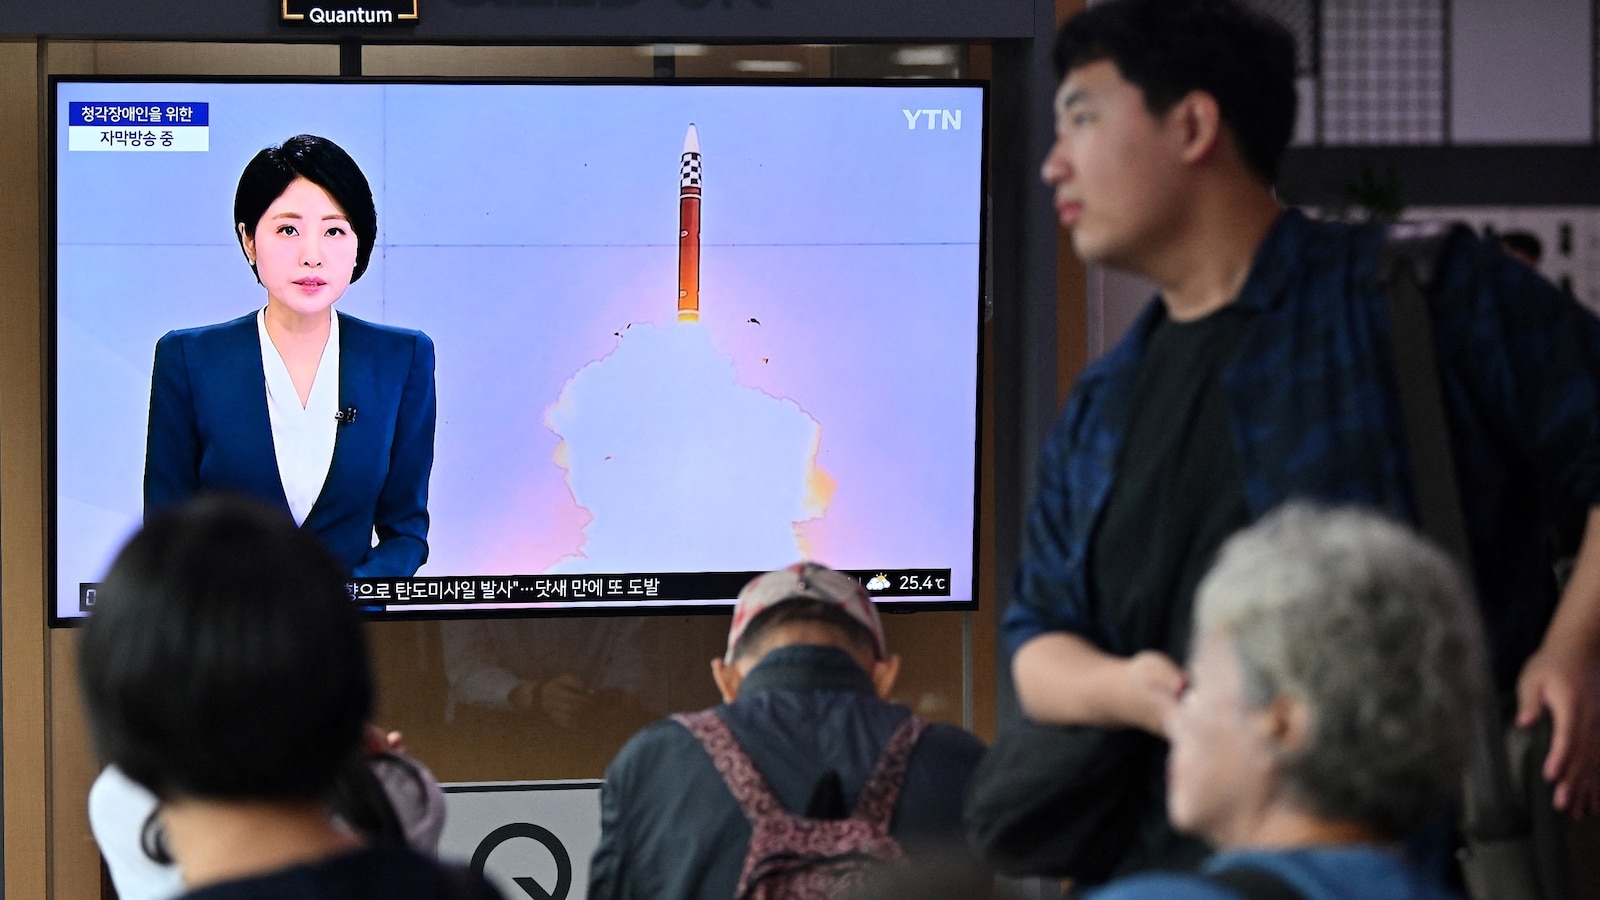 North Korea tests 2 missiles, 1 reportedly may have fallen on land